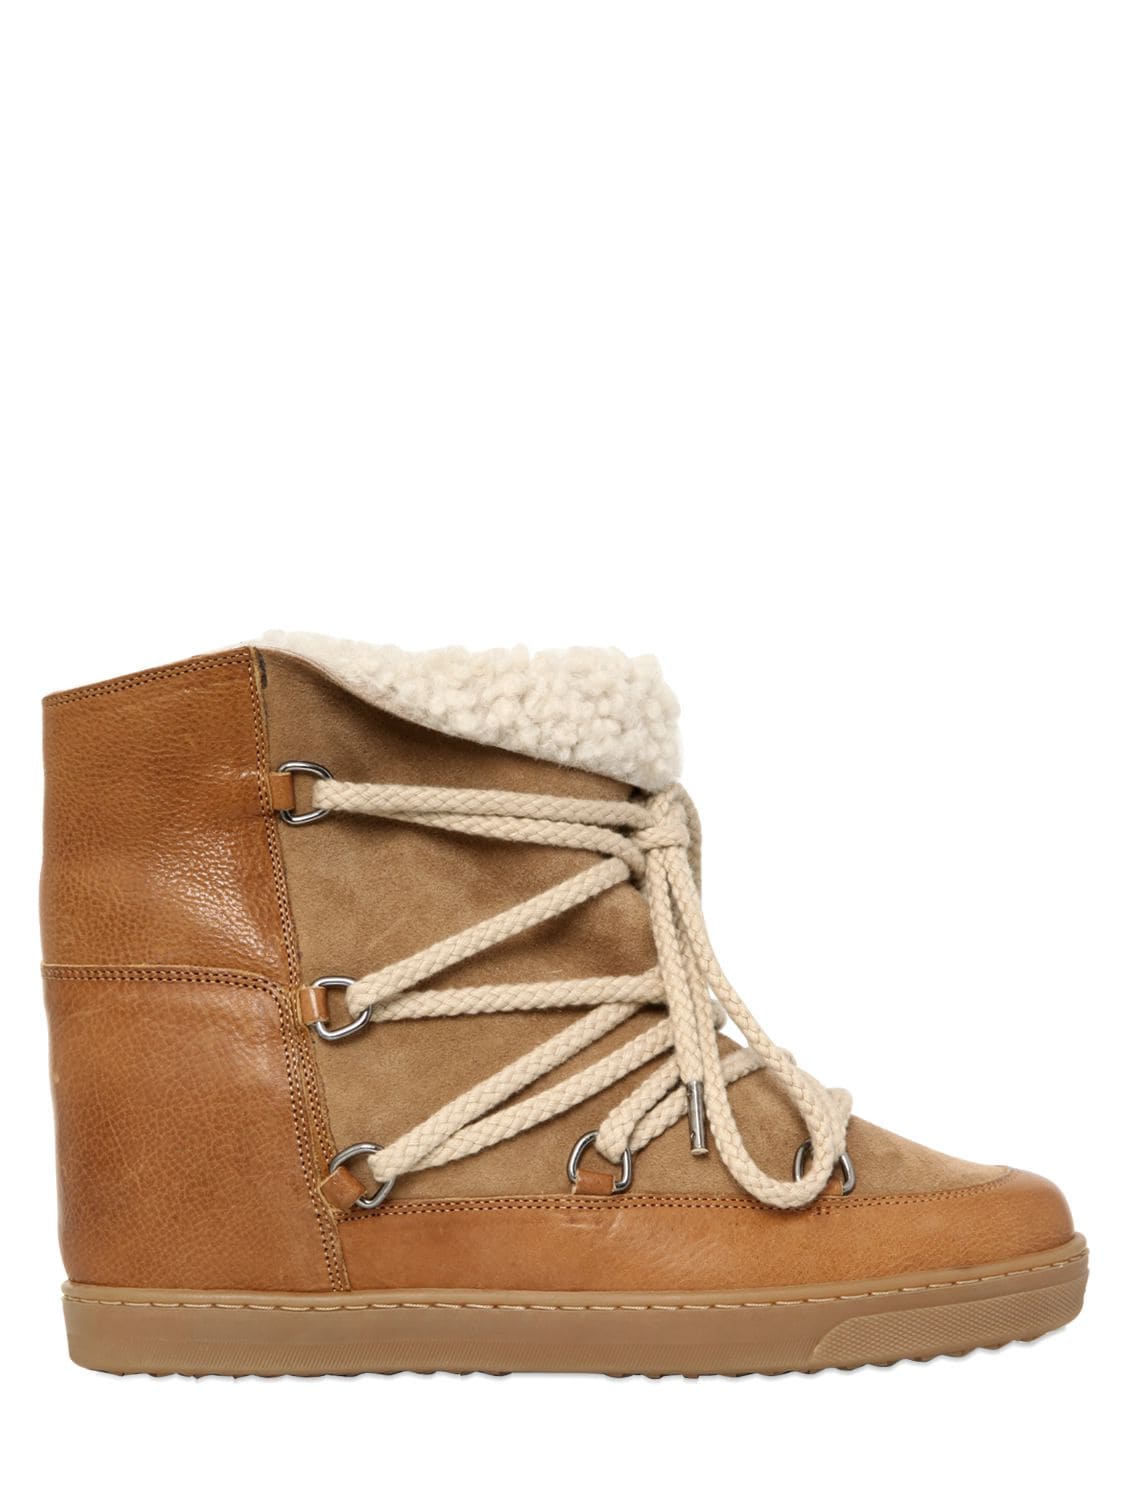 Isabel Marant 70mm Nowles Shearling Wedged In Camel